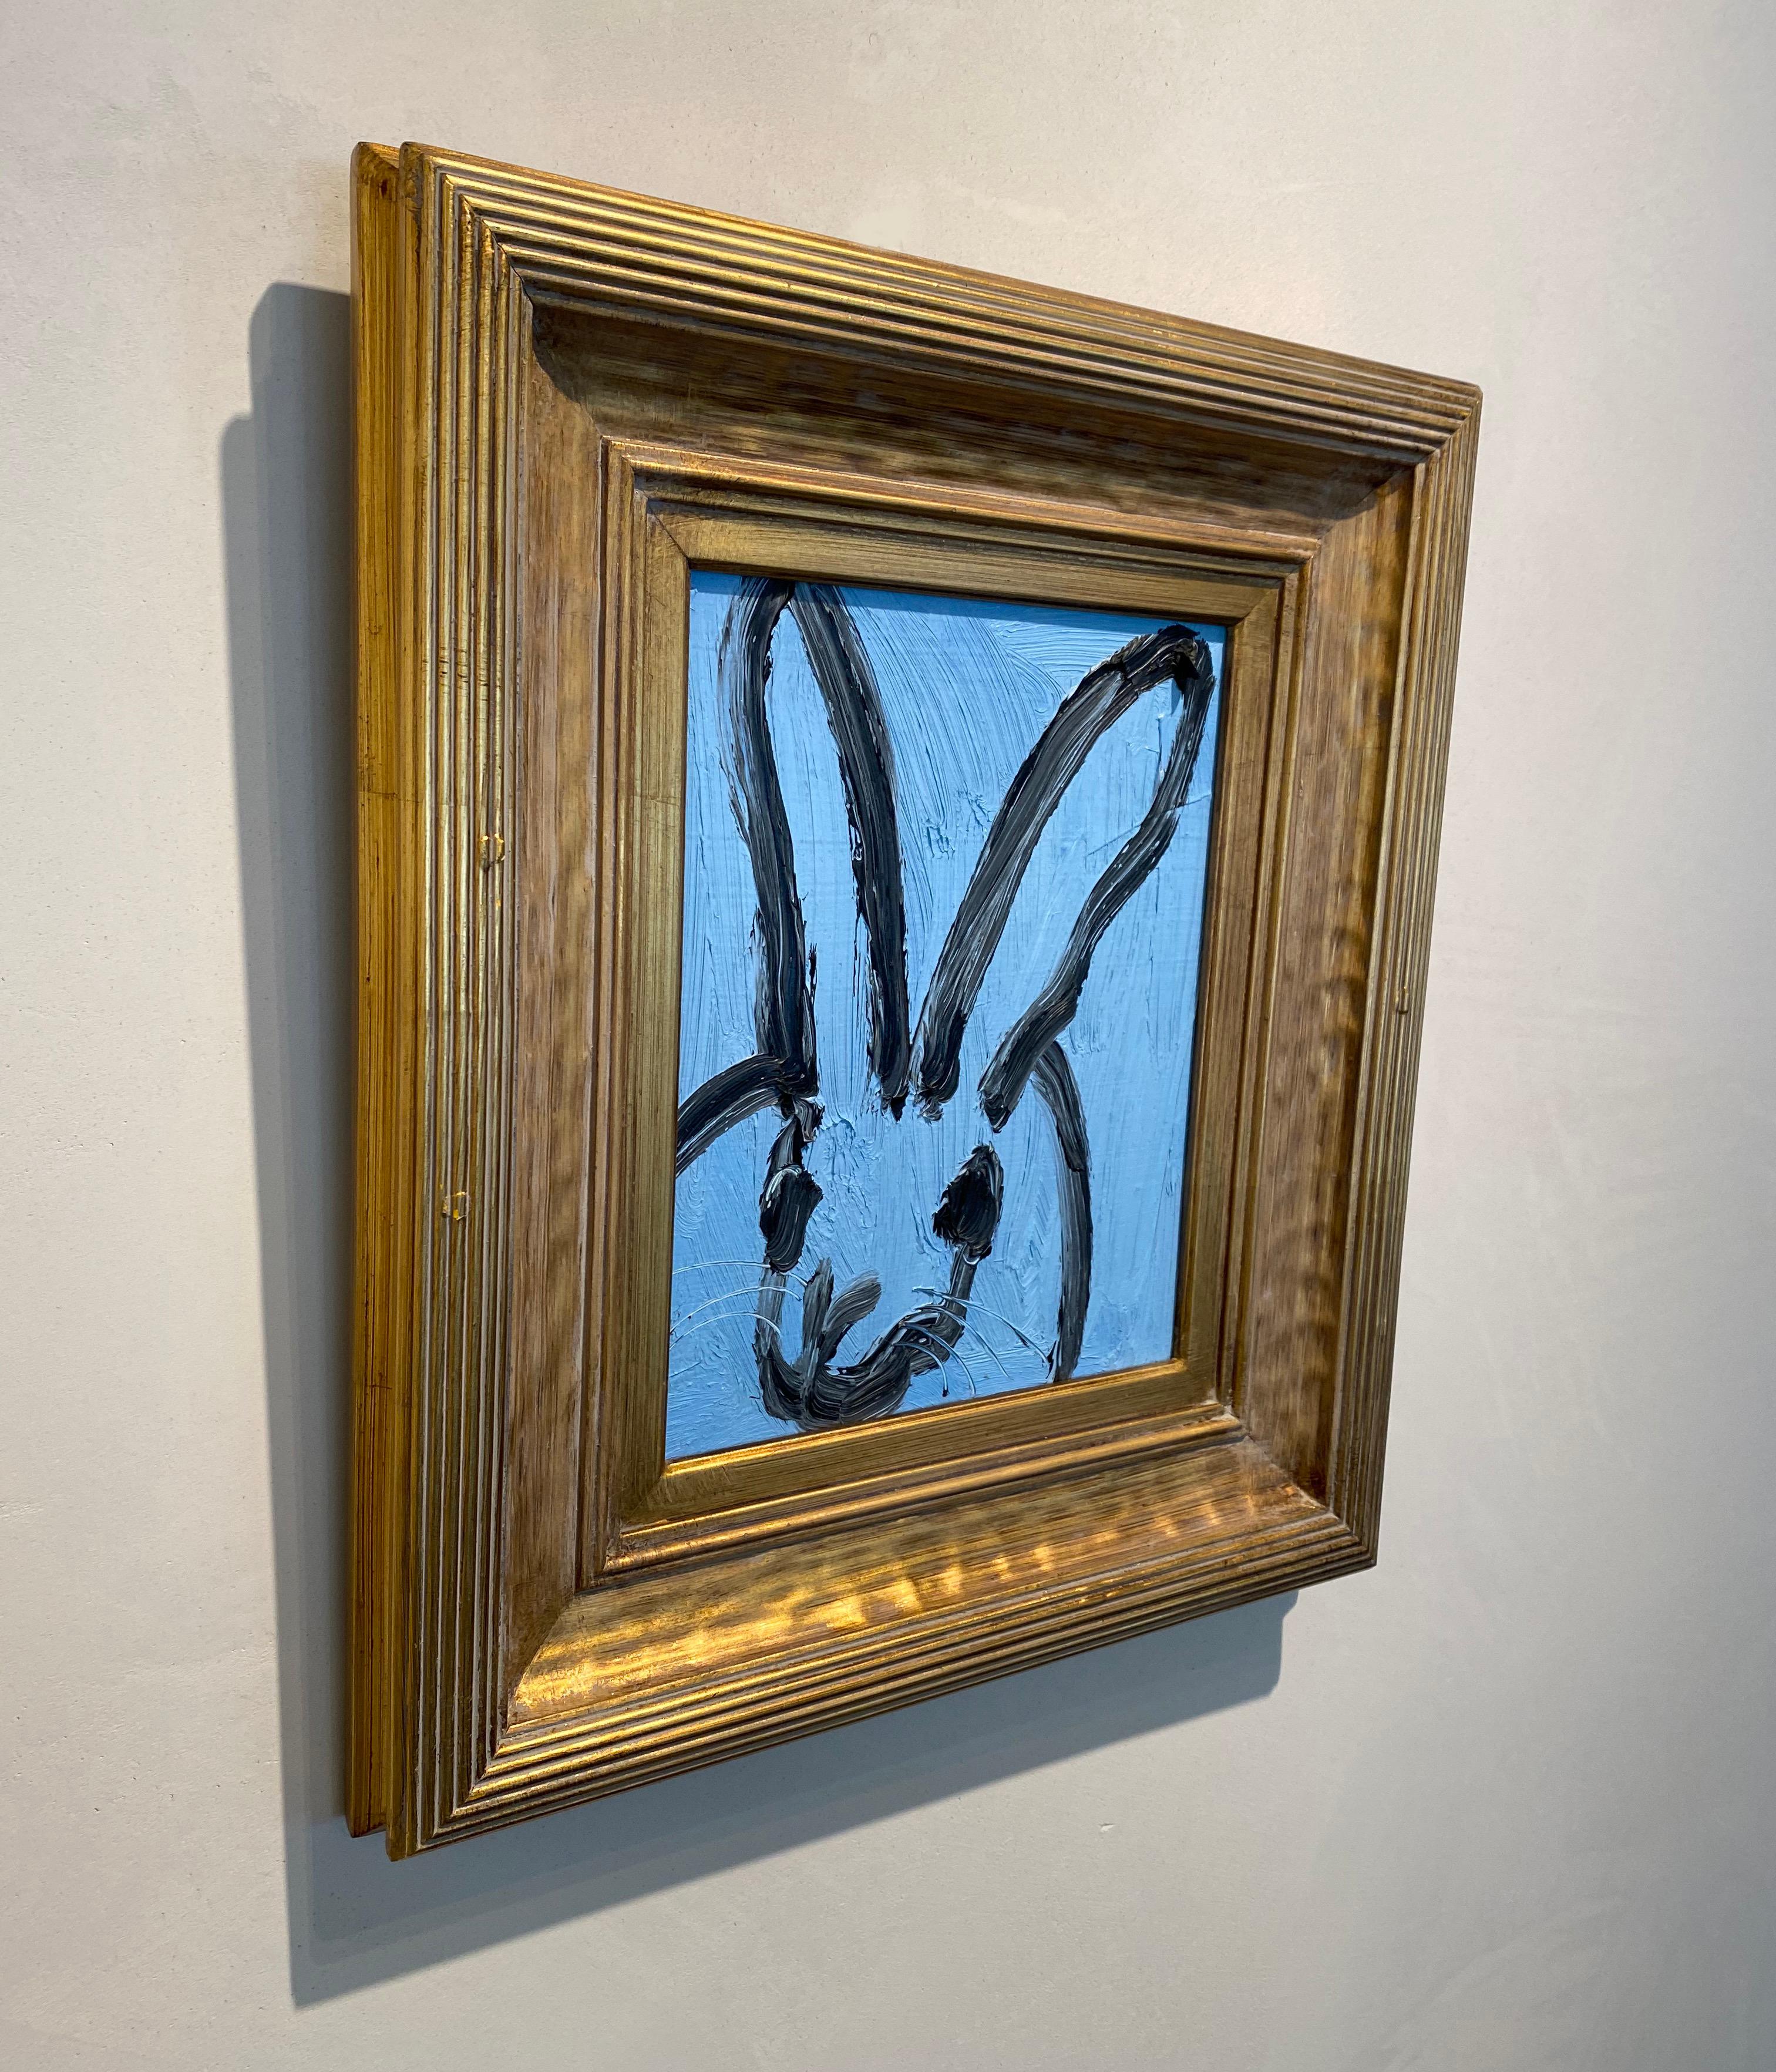 Painting size: 10 x 8 inches 
Frame size: 16 x 14 inches
This light blue bunny demonstrates Hunt Slonem's  neo-expressionist style. Framed in a vintage frame.   These layered, and thickly painted smaller pieces exemplify his vivid and exuberant